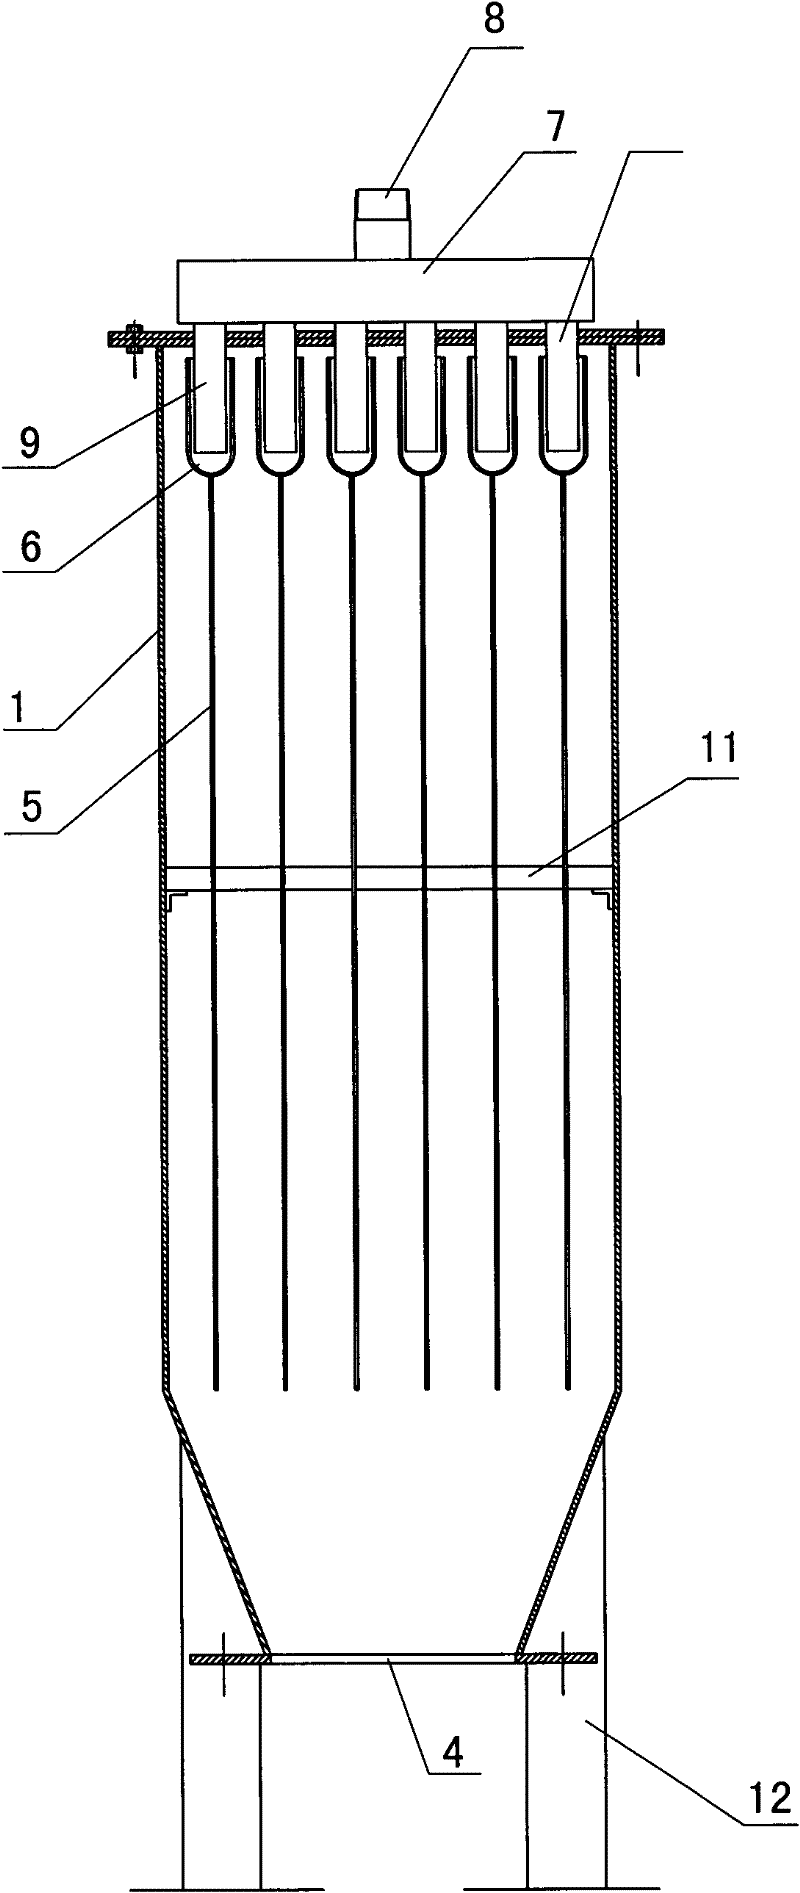 Laminar flow condenser for thermal decomposition and liquidation of biomass